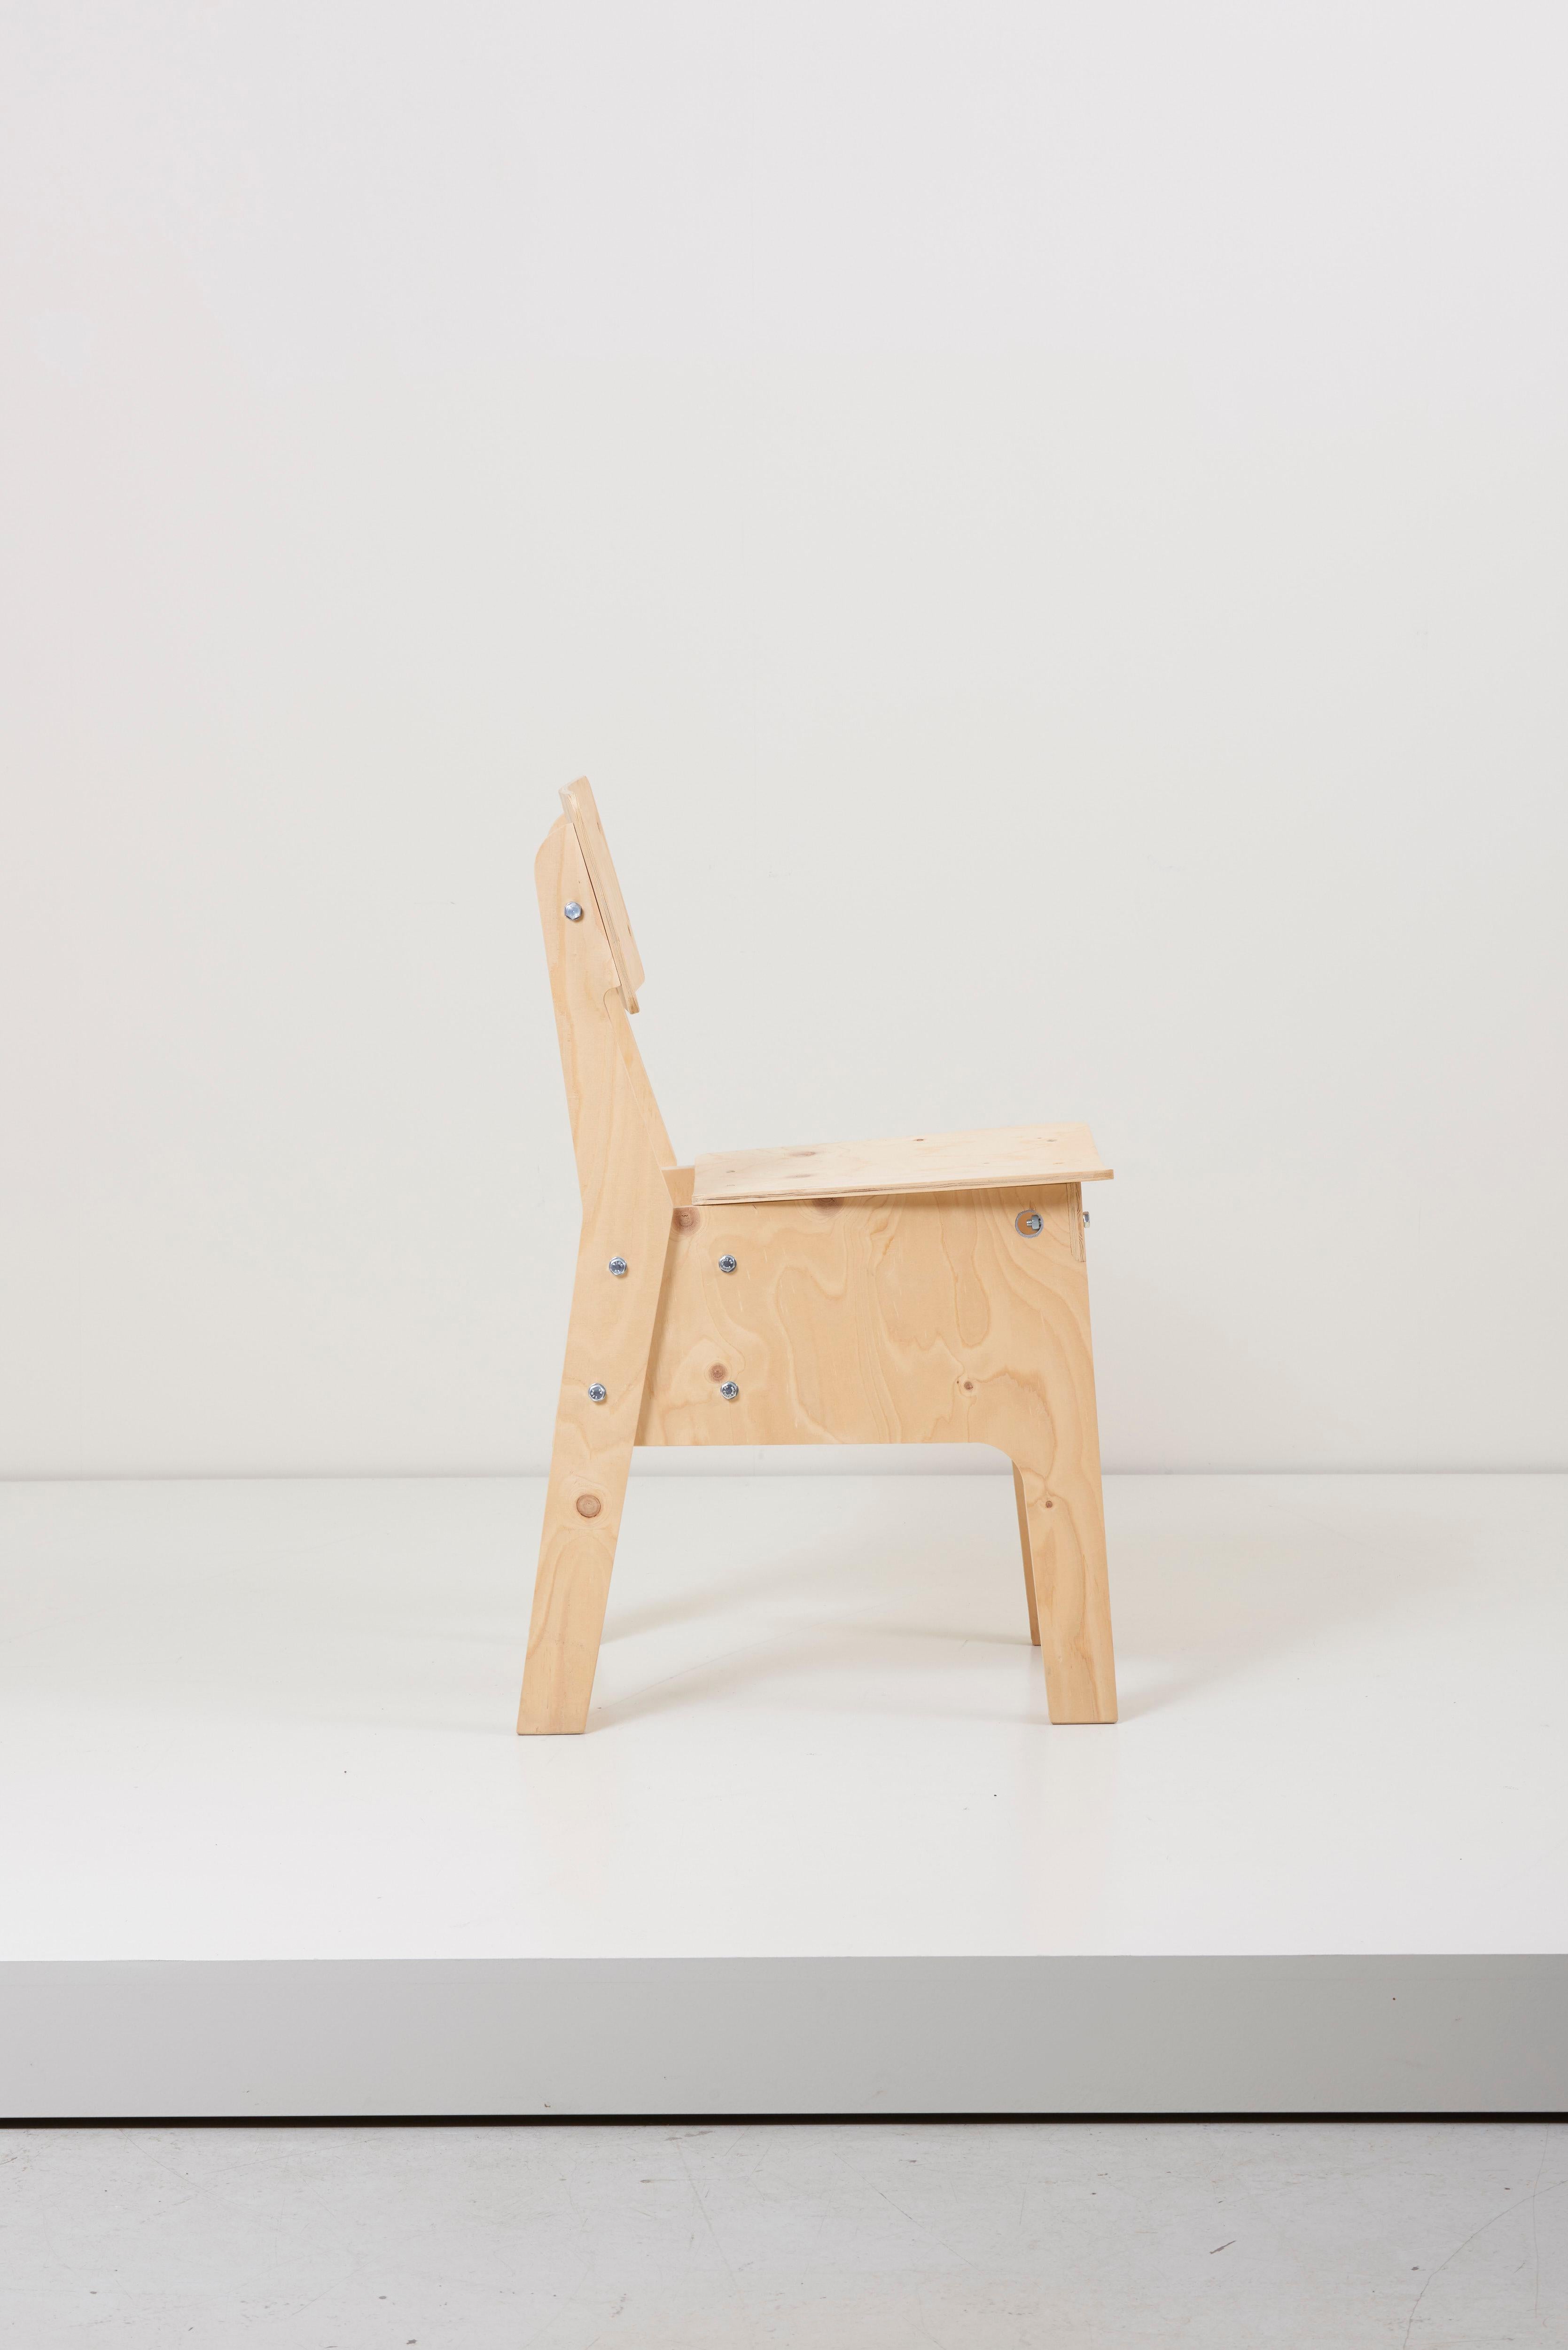 1 of 3 Crisis Chairs by Piet Hein Eek in Plywood 2